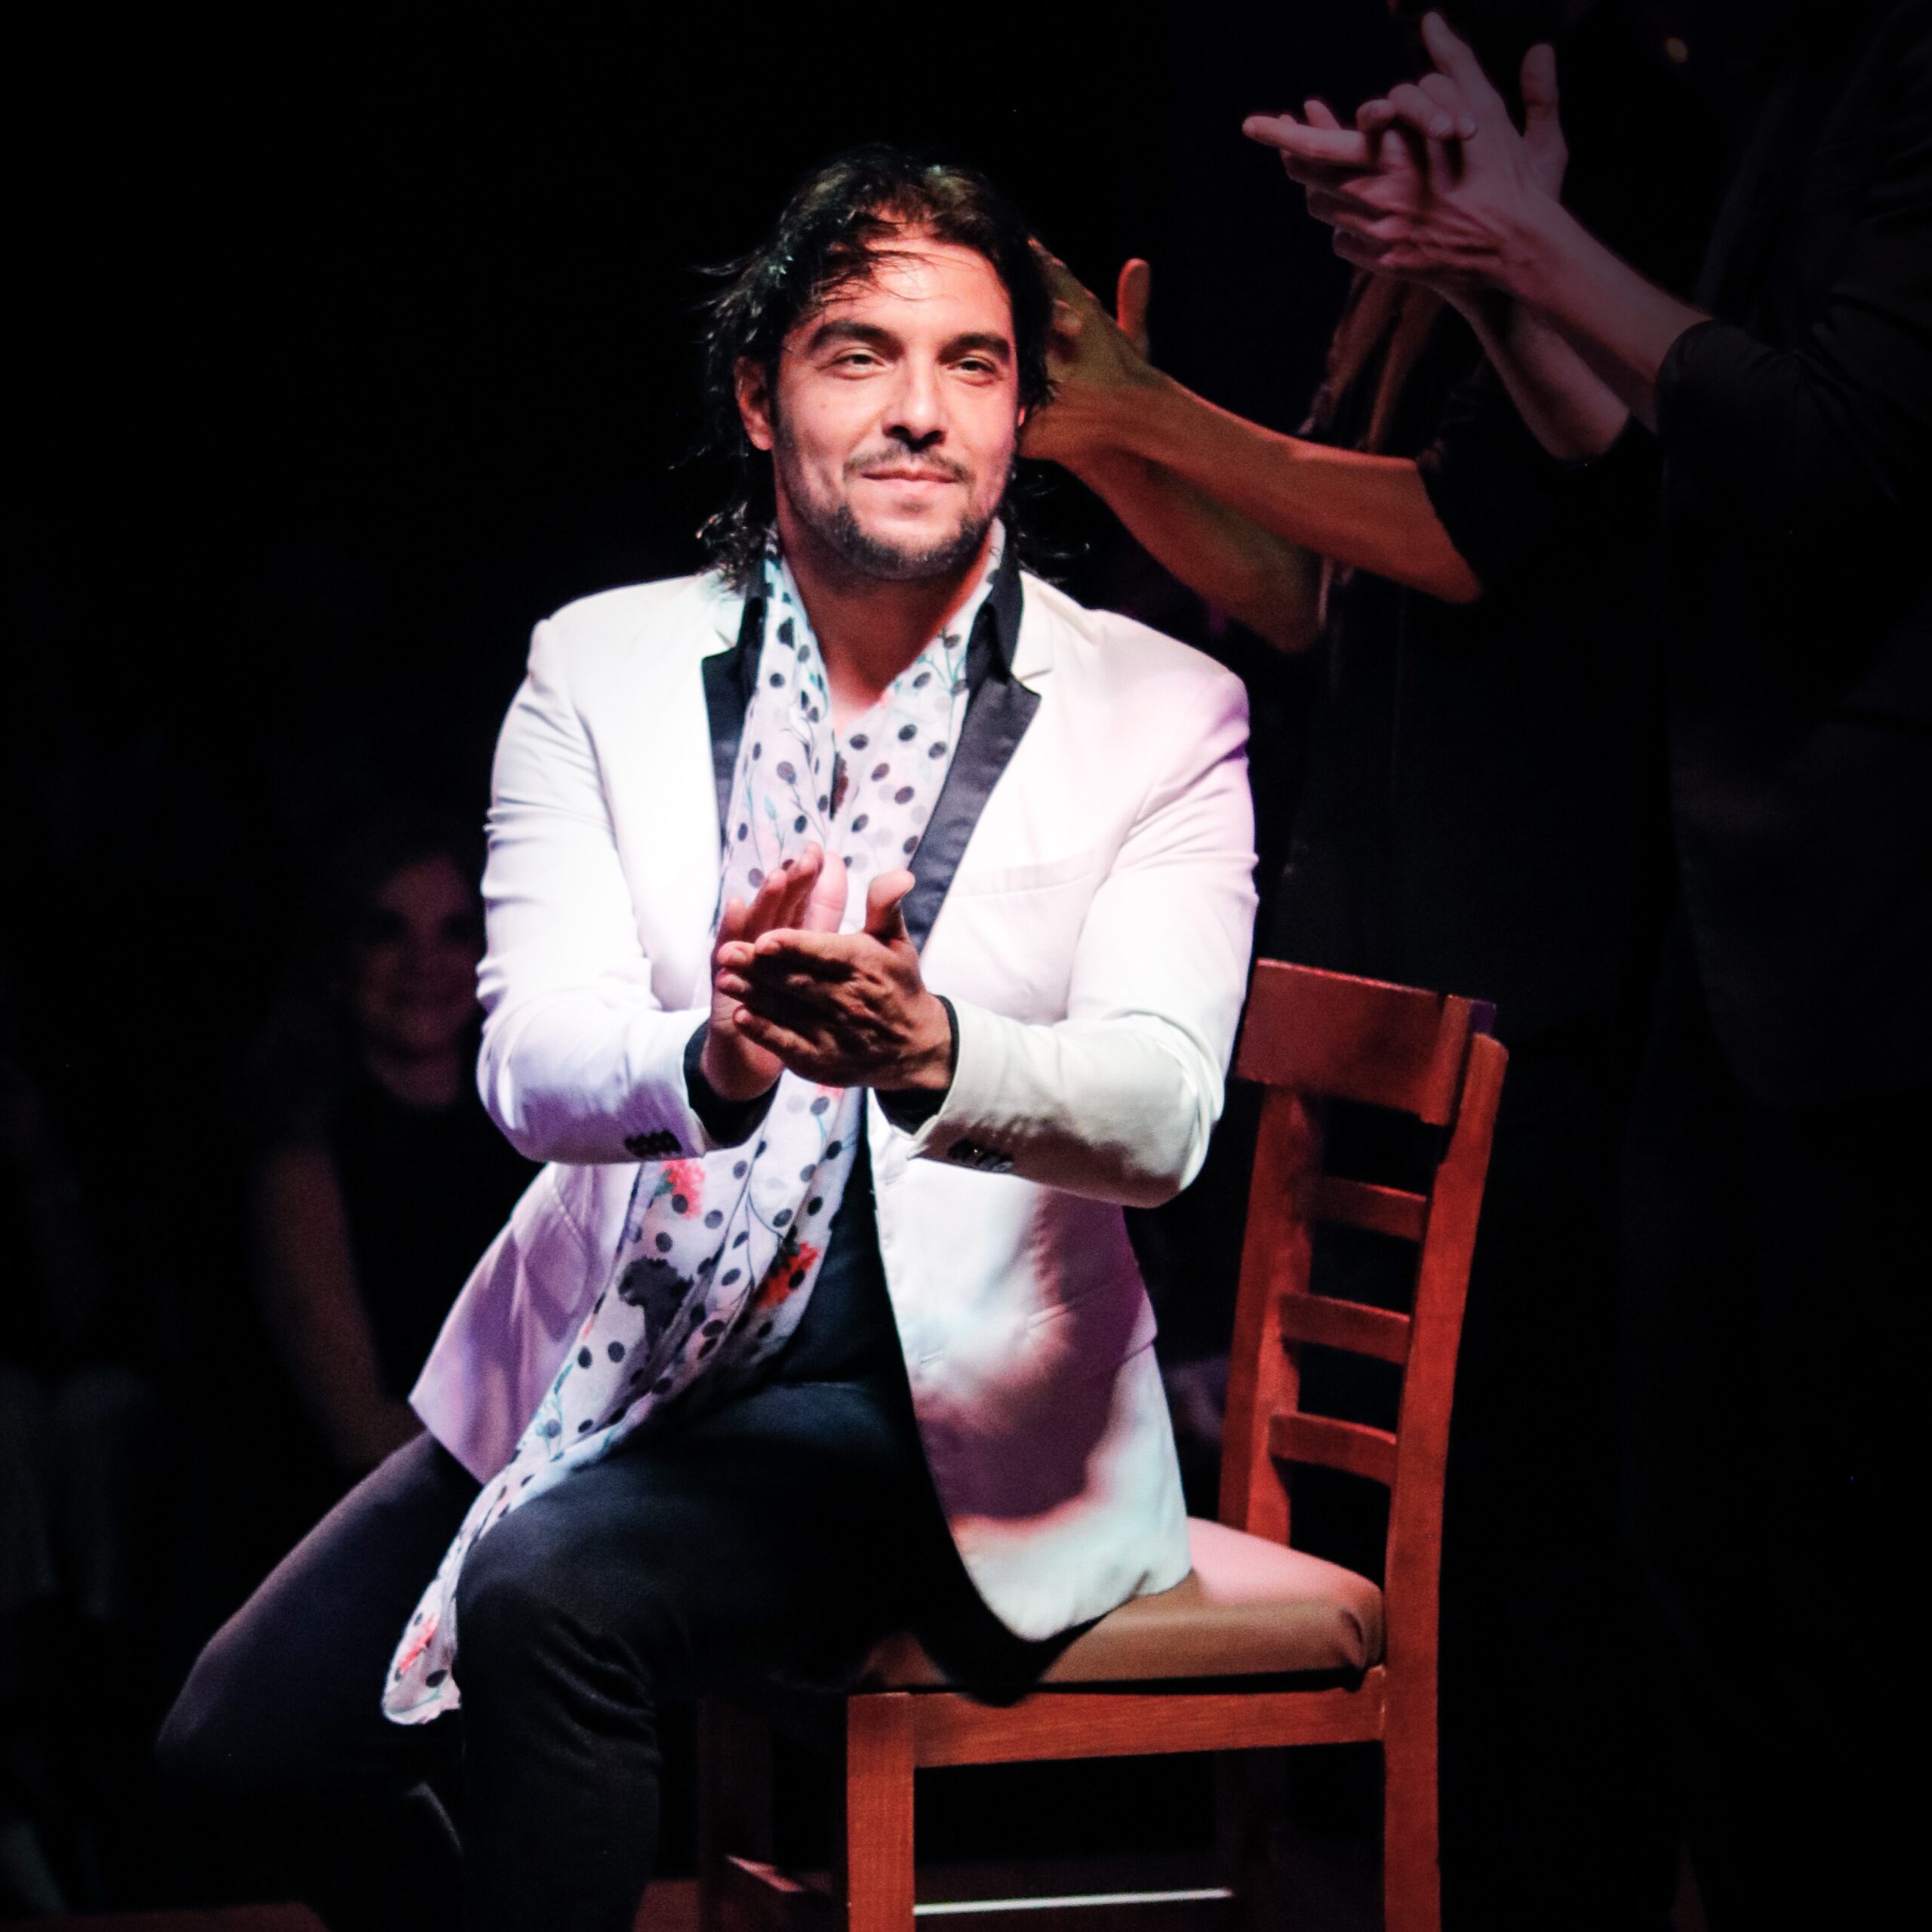 A man wearing a white jacket and polka dot scarf sitting in a chair clapping